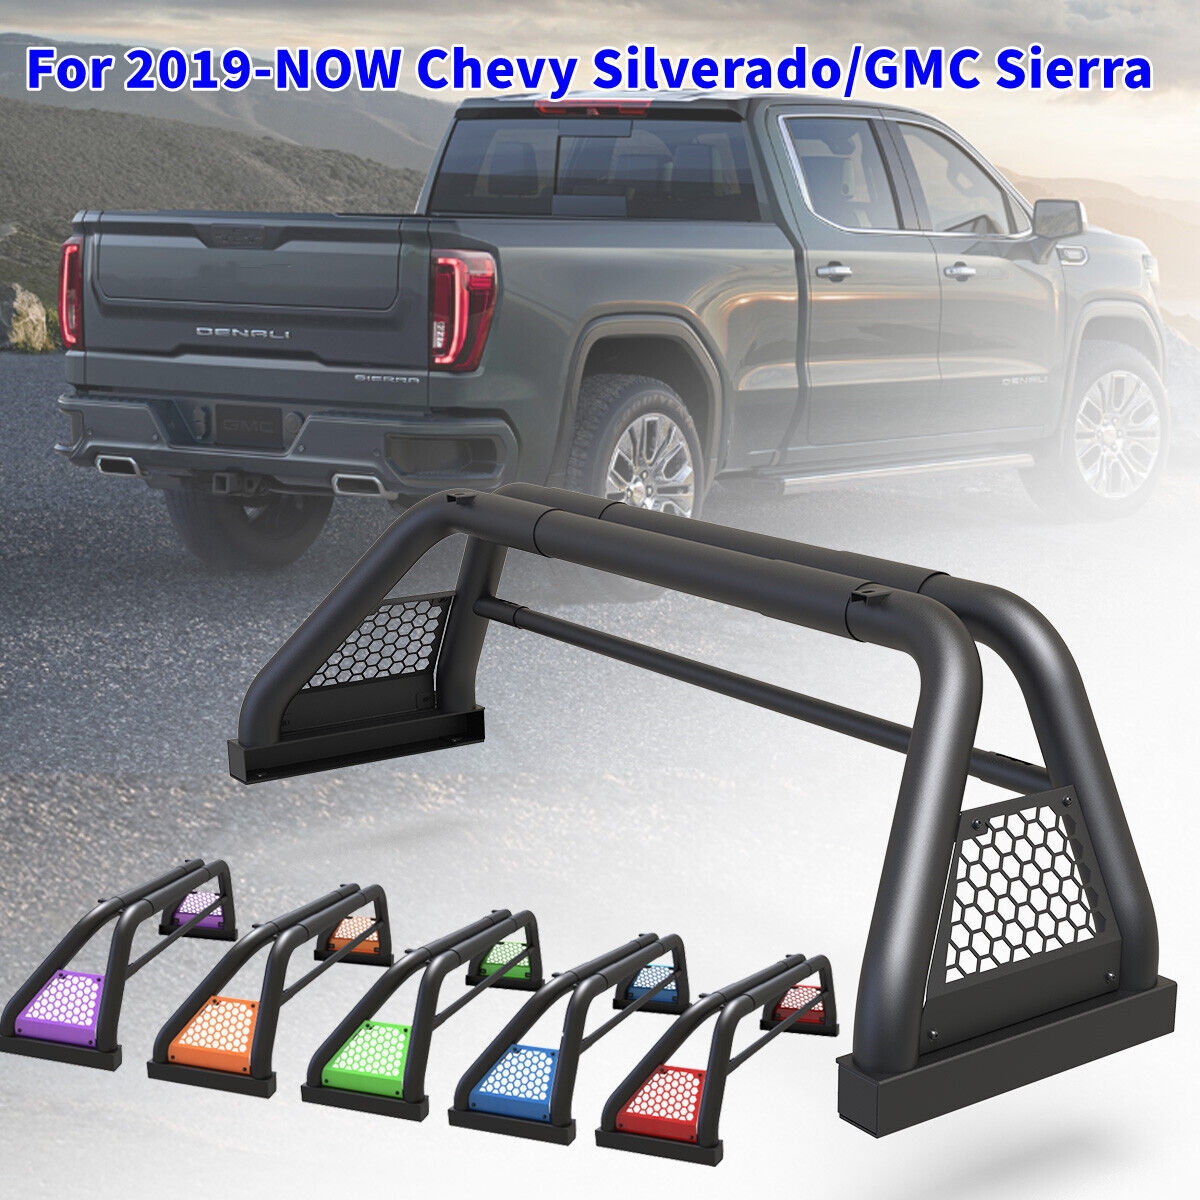 For 2019-NOW Chevy silverado/GMC Sierra Pickup Roll Sport Bar Chase Rack Bed Bar